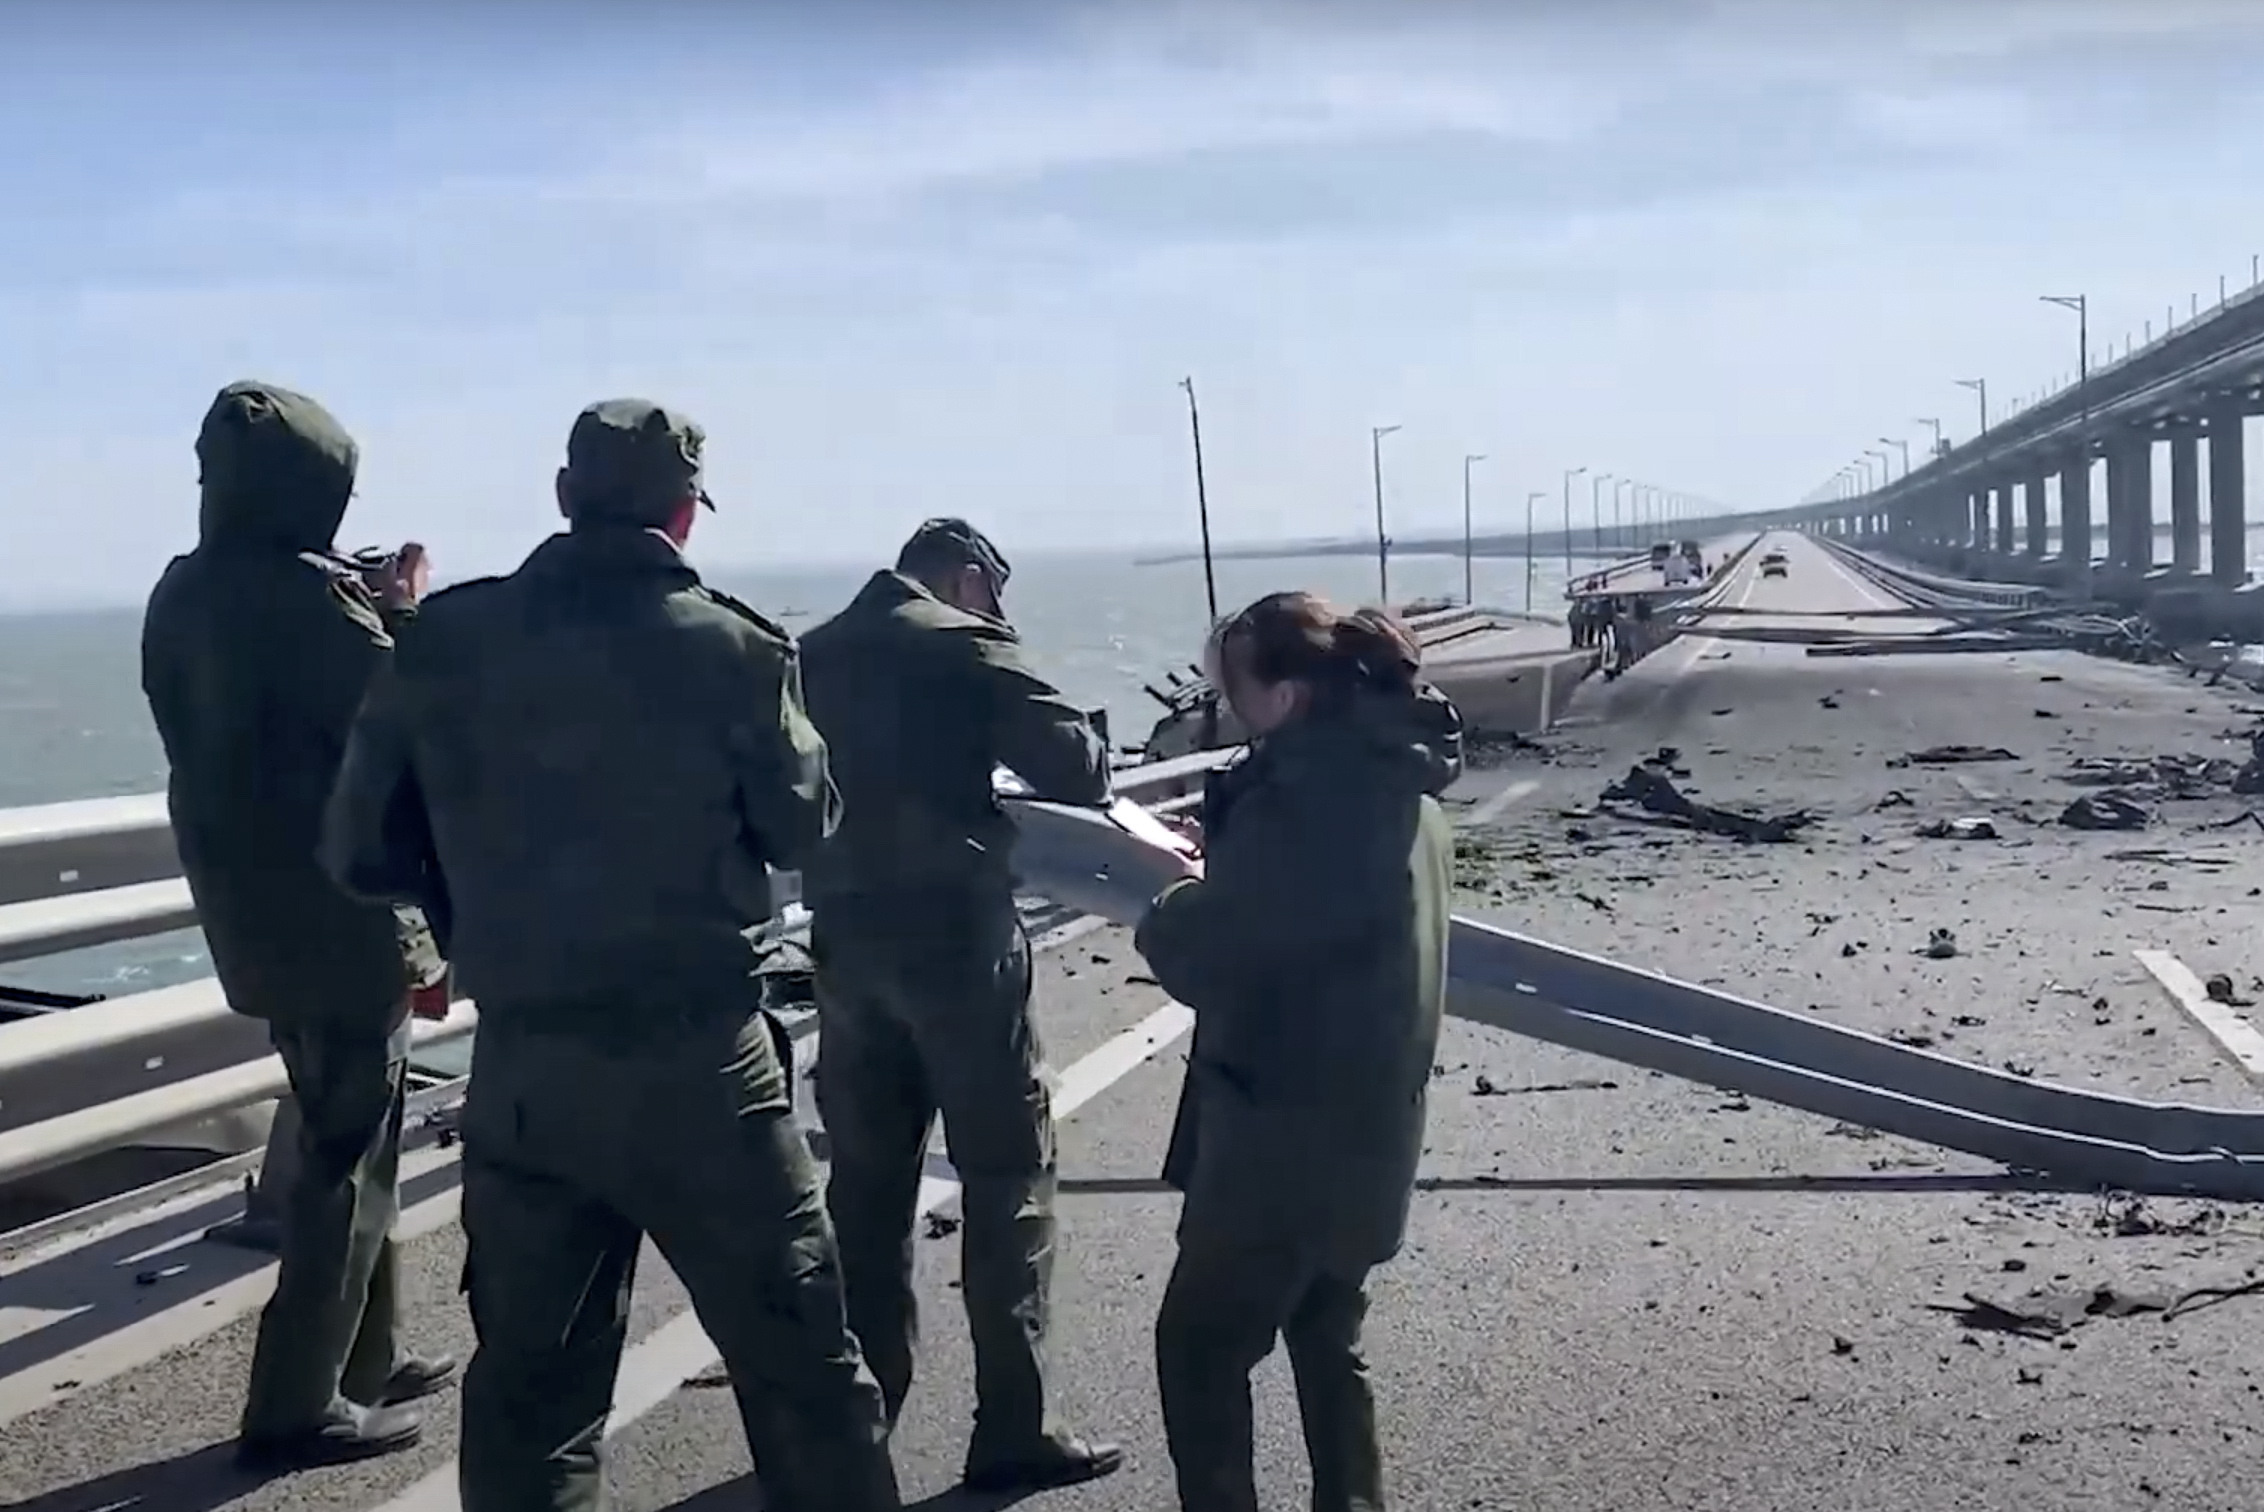 epa10230384 A still image taken from handout video provided by the Russian Investigative committee shows Russian investigators work on a collapsed part of the Kerch Strait bridge in Crimea, 08 October 2022. According to Russian authorities, "an explosion was set off at a cargo vehicle on the motorway part of the Crimean bridge on the side of the Taman peninsula, which set fire to seven fuel tanks of a train that was en route to the Crimean peninsula. Two motorway sections of the bridge partially collapsed."  EPA/RUSSIAN INVESTIGATIVE COMMITEE HANDOUT  HANDOUT EDITORIAL USE ONLY/NO SALES